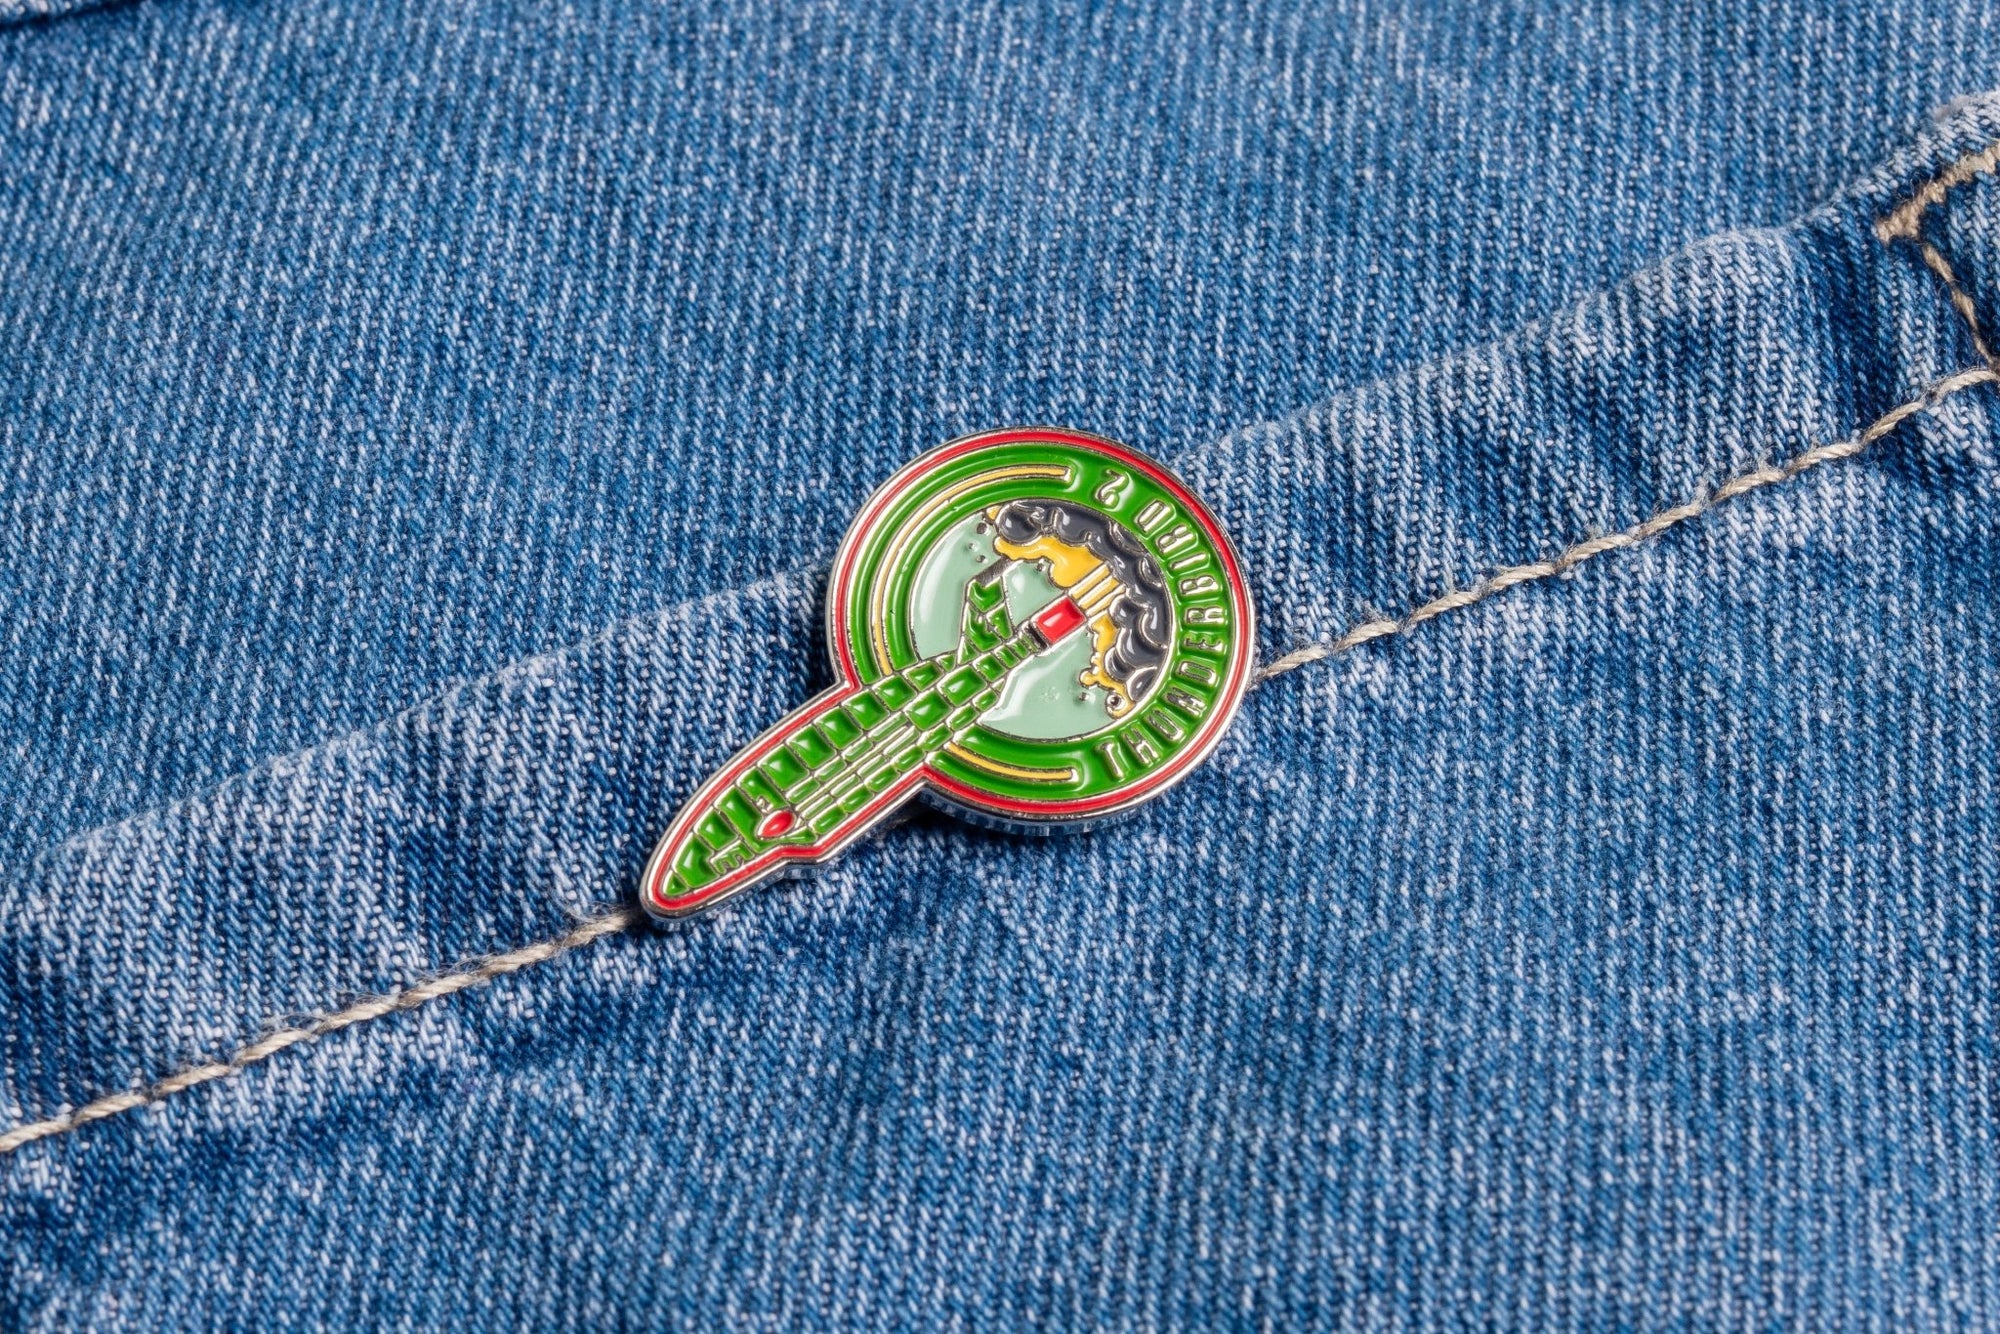 New Thunderbirds Pins - The Gerry Anderson Store